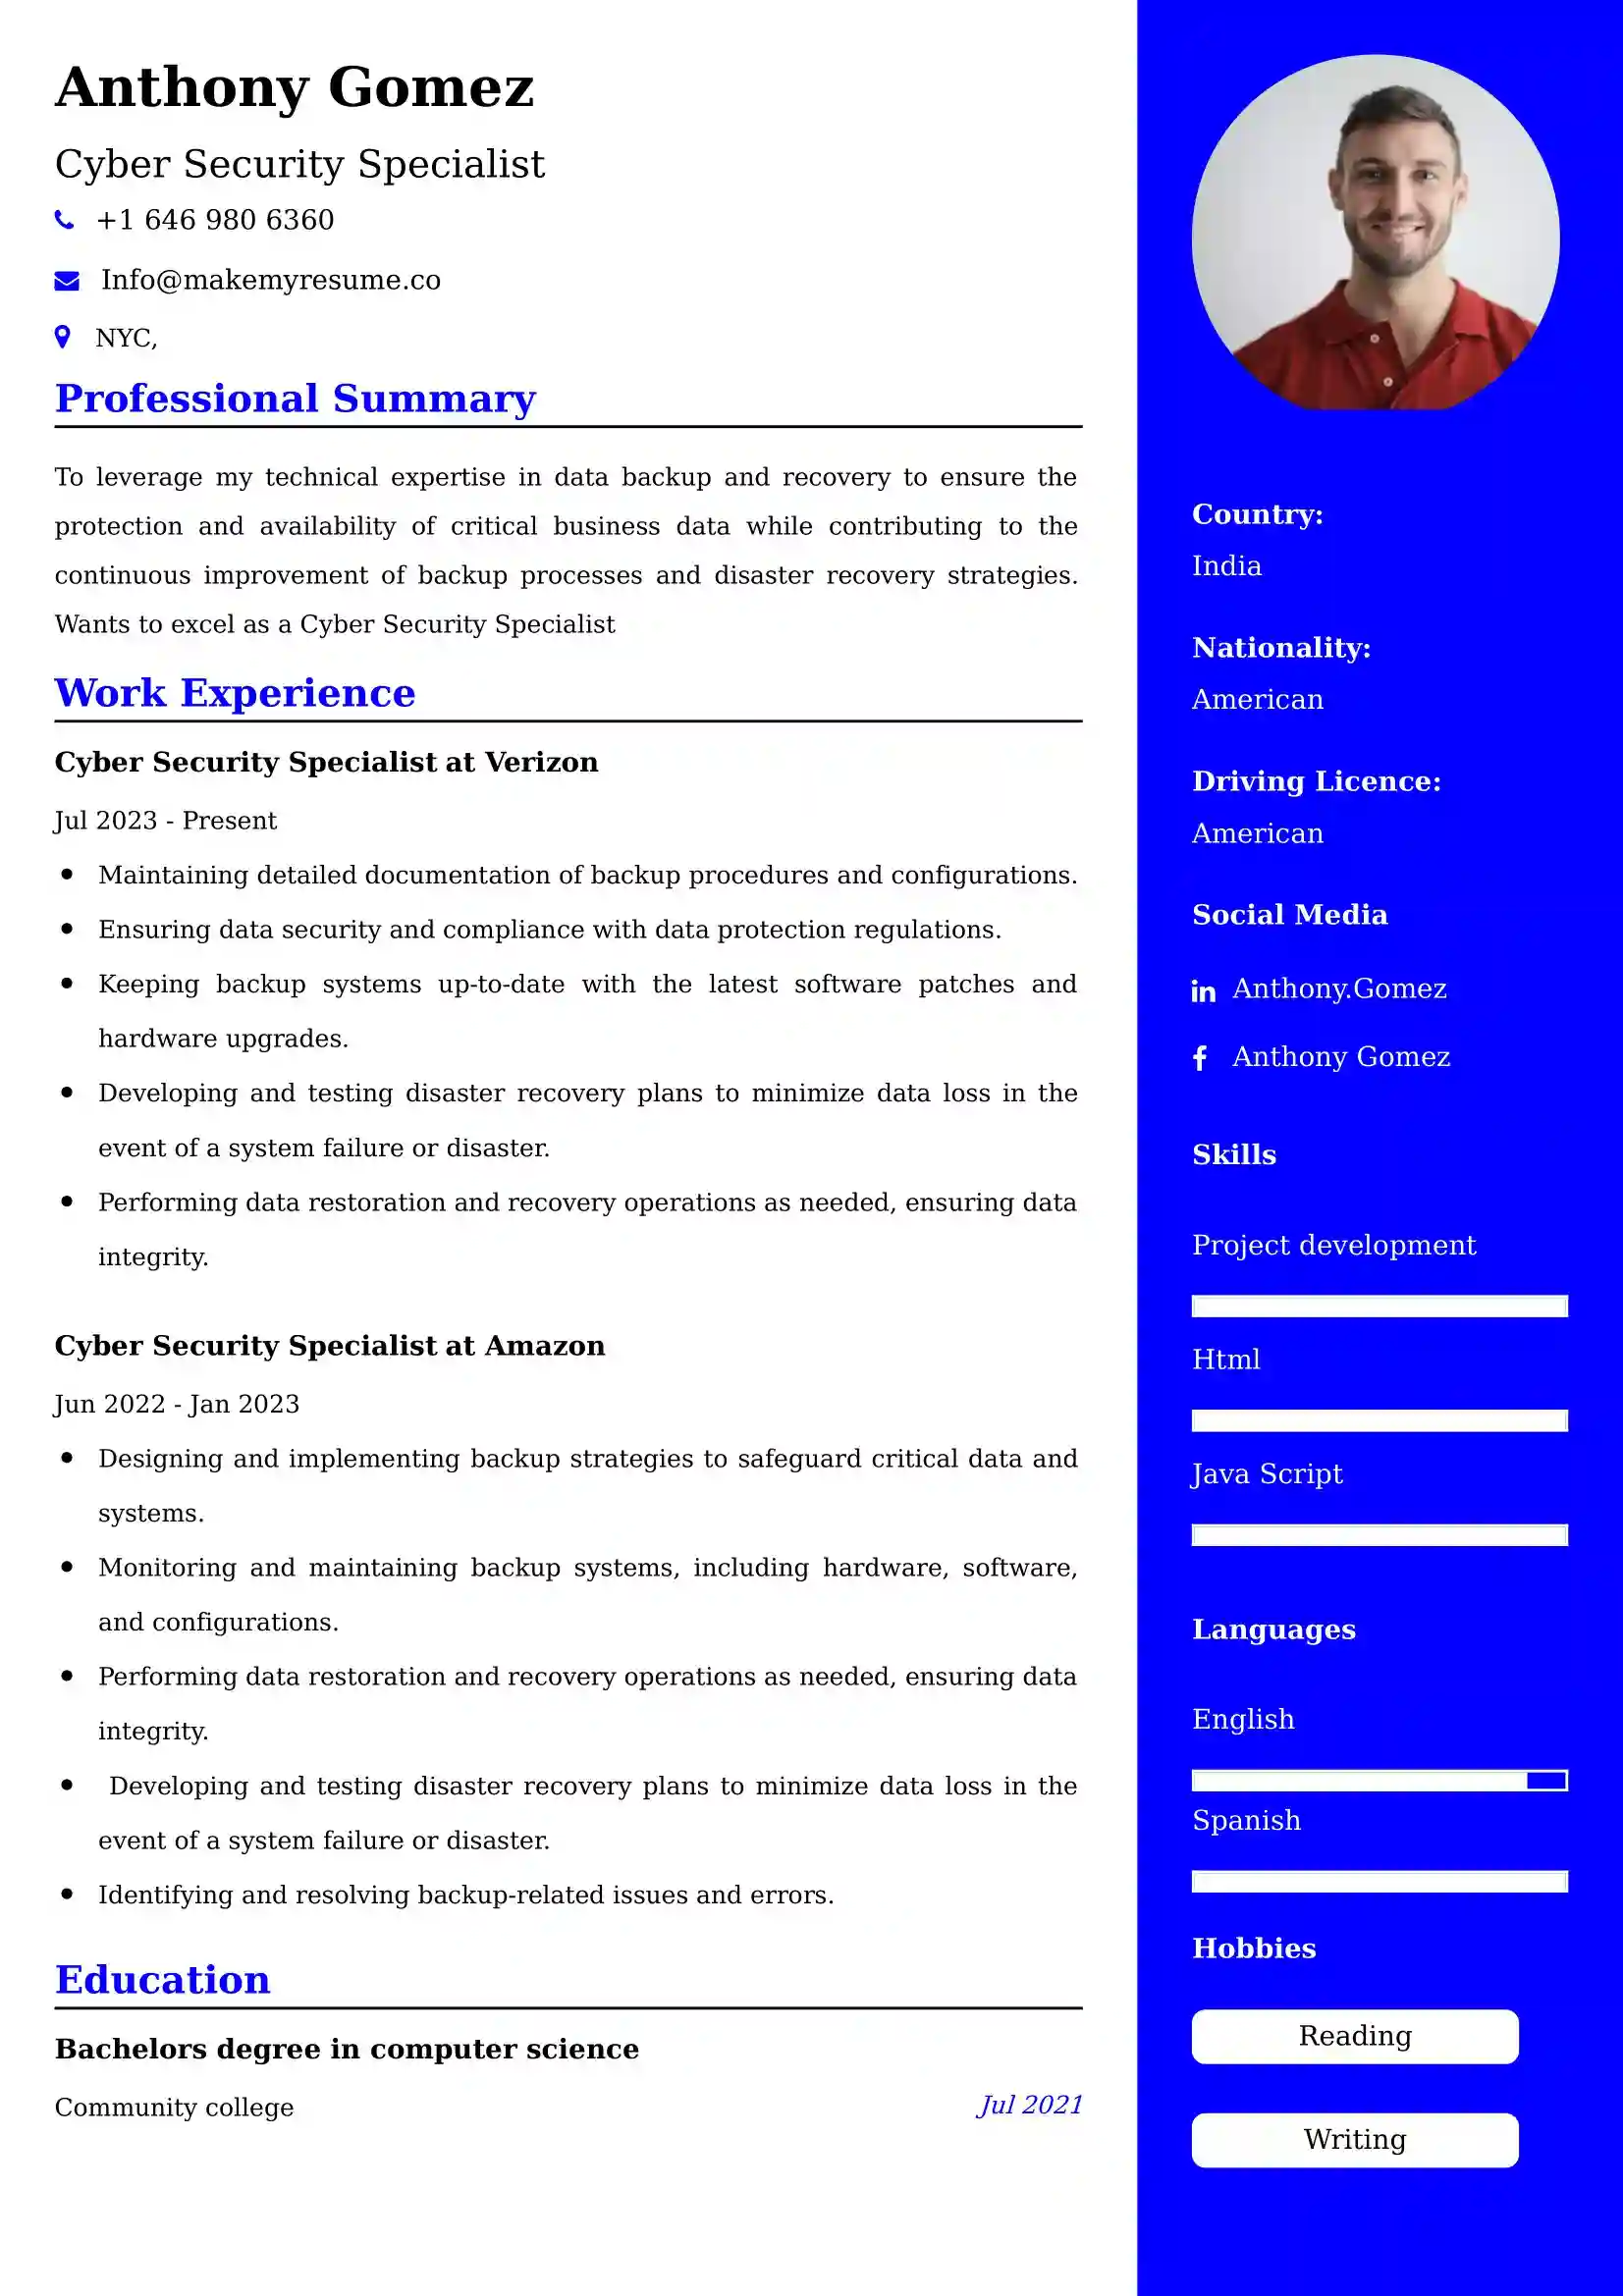 Cyber Security Specialist Resume Examples for UK Jobs - Tips and Guide